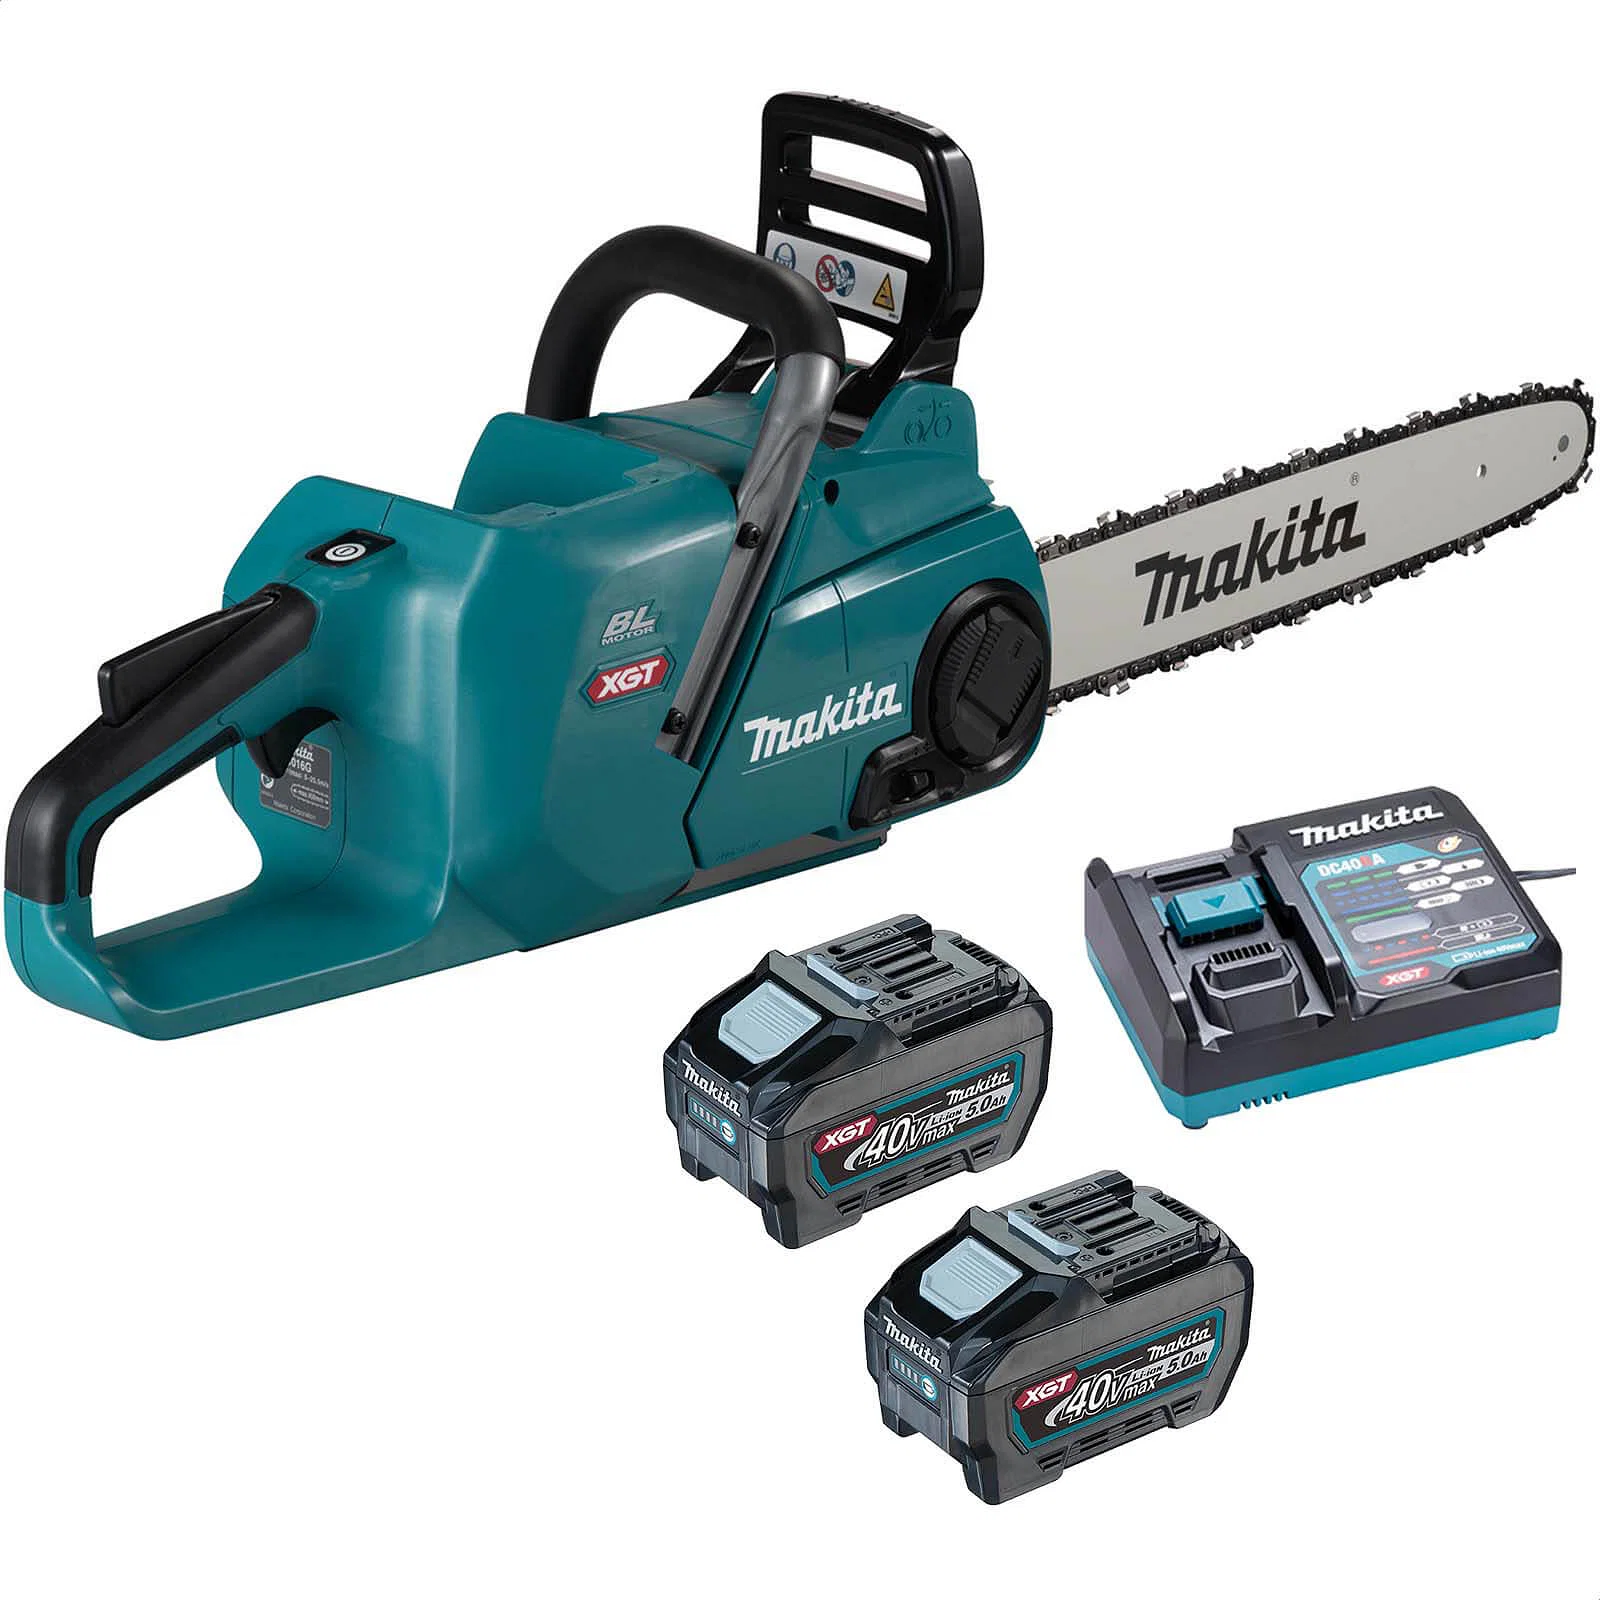 | Product Review - Einhell GH-EC 2040 Electric Chainsaw: Powerful and Reliable | 1Garden.com